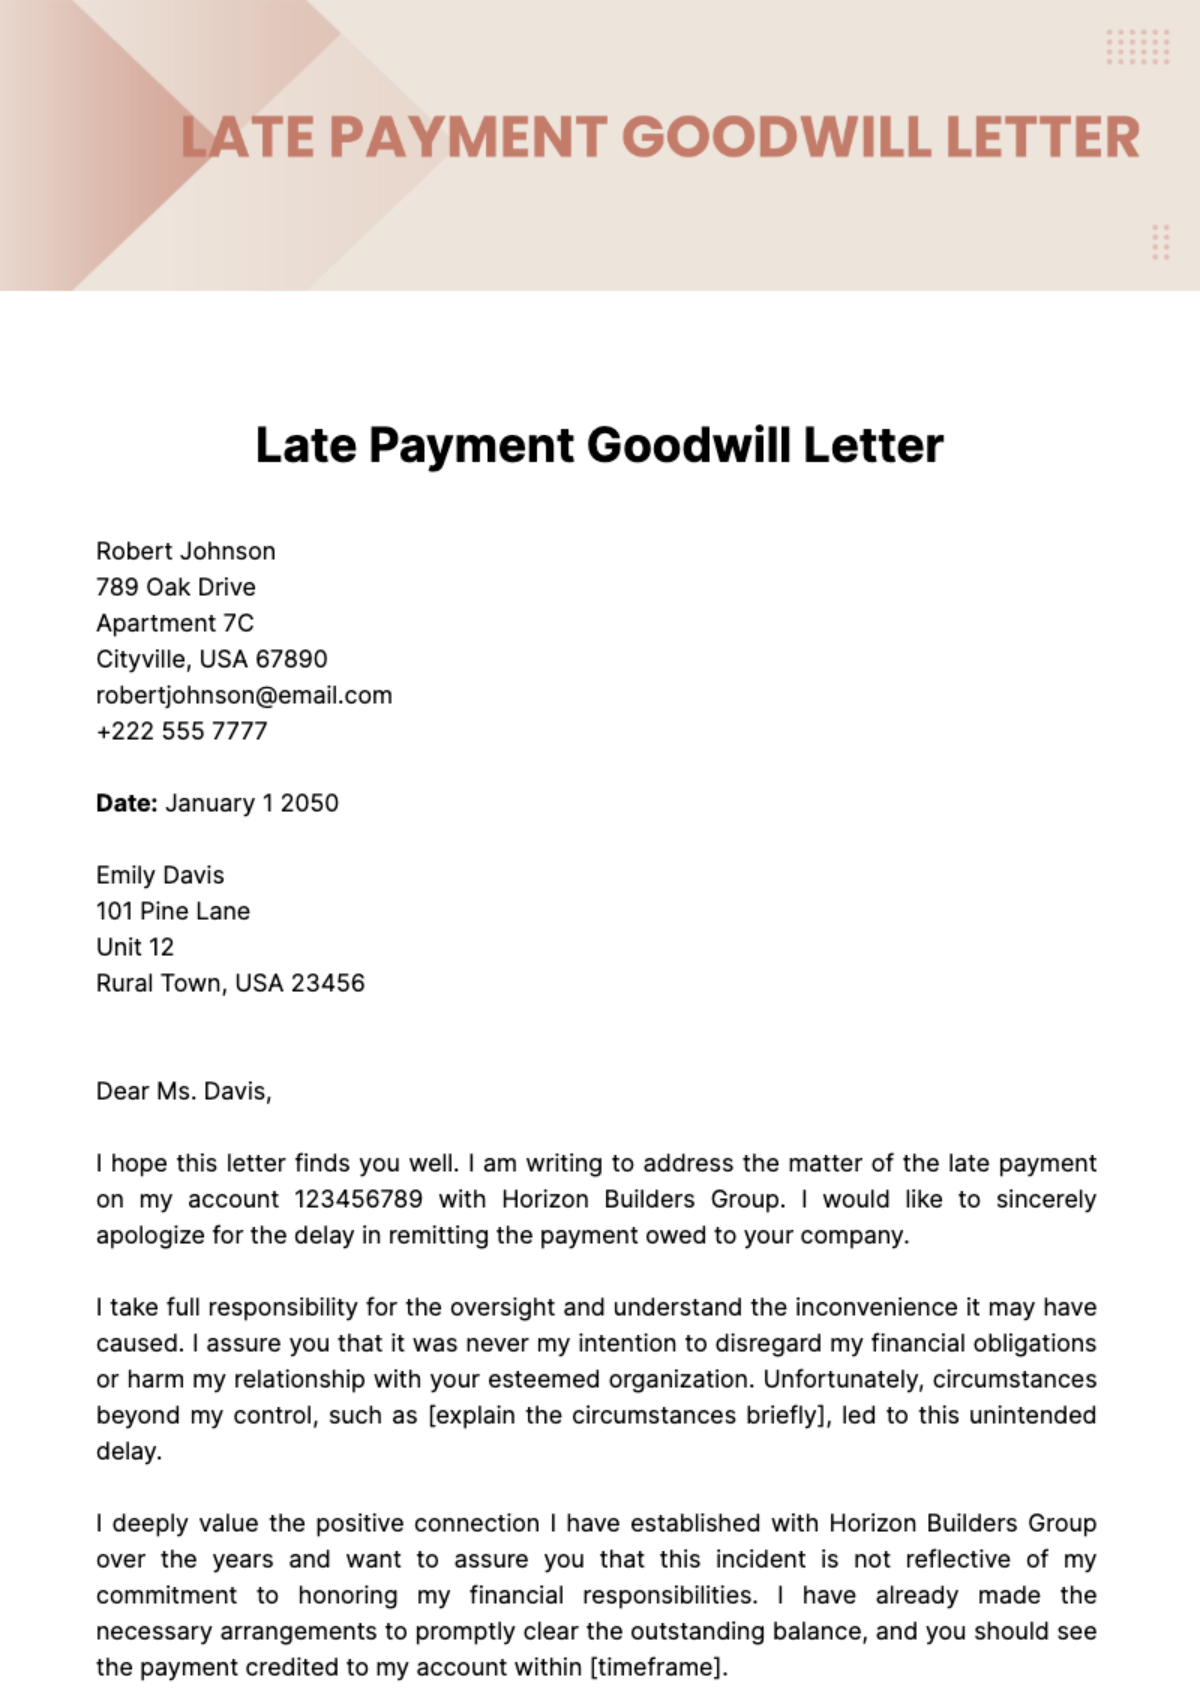 Late Payment Goodwill Letter Template